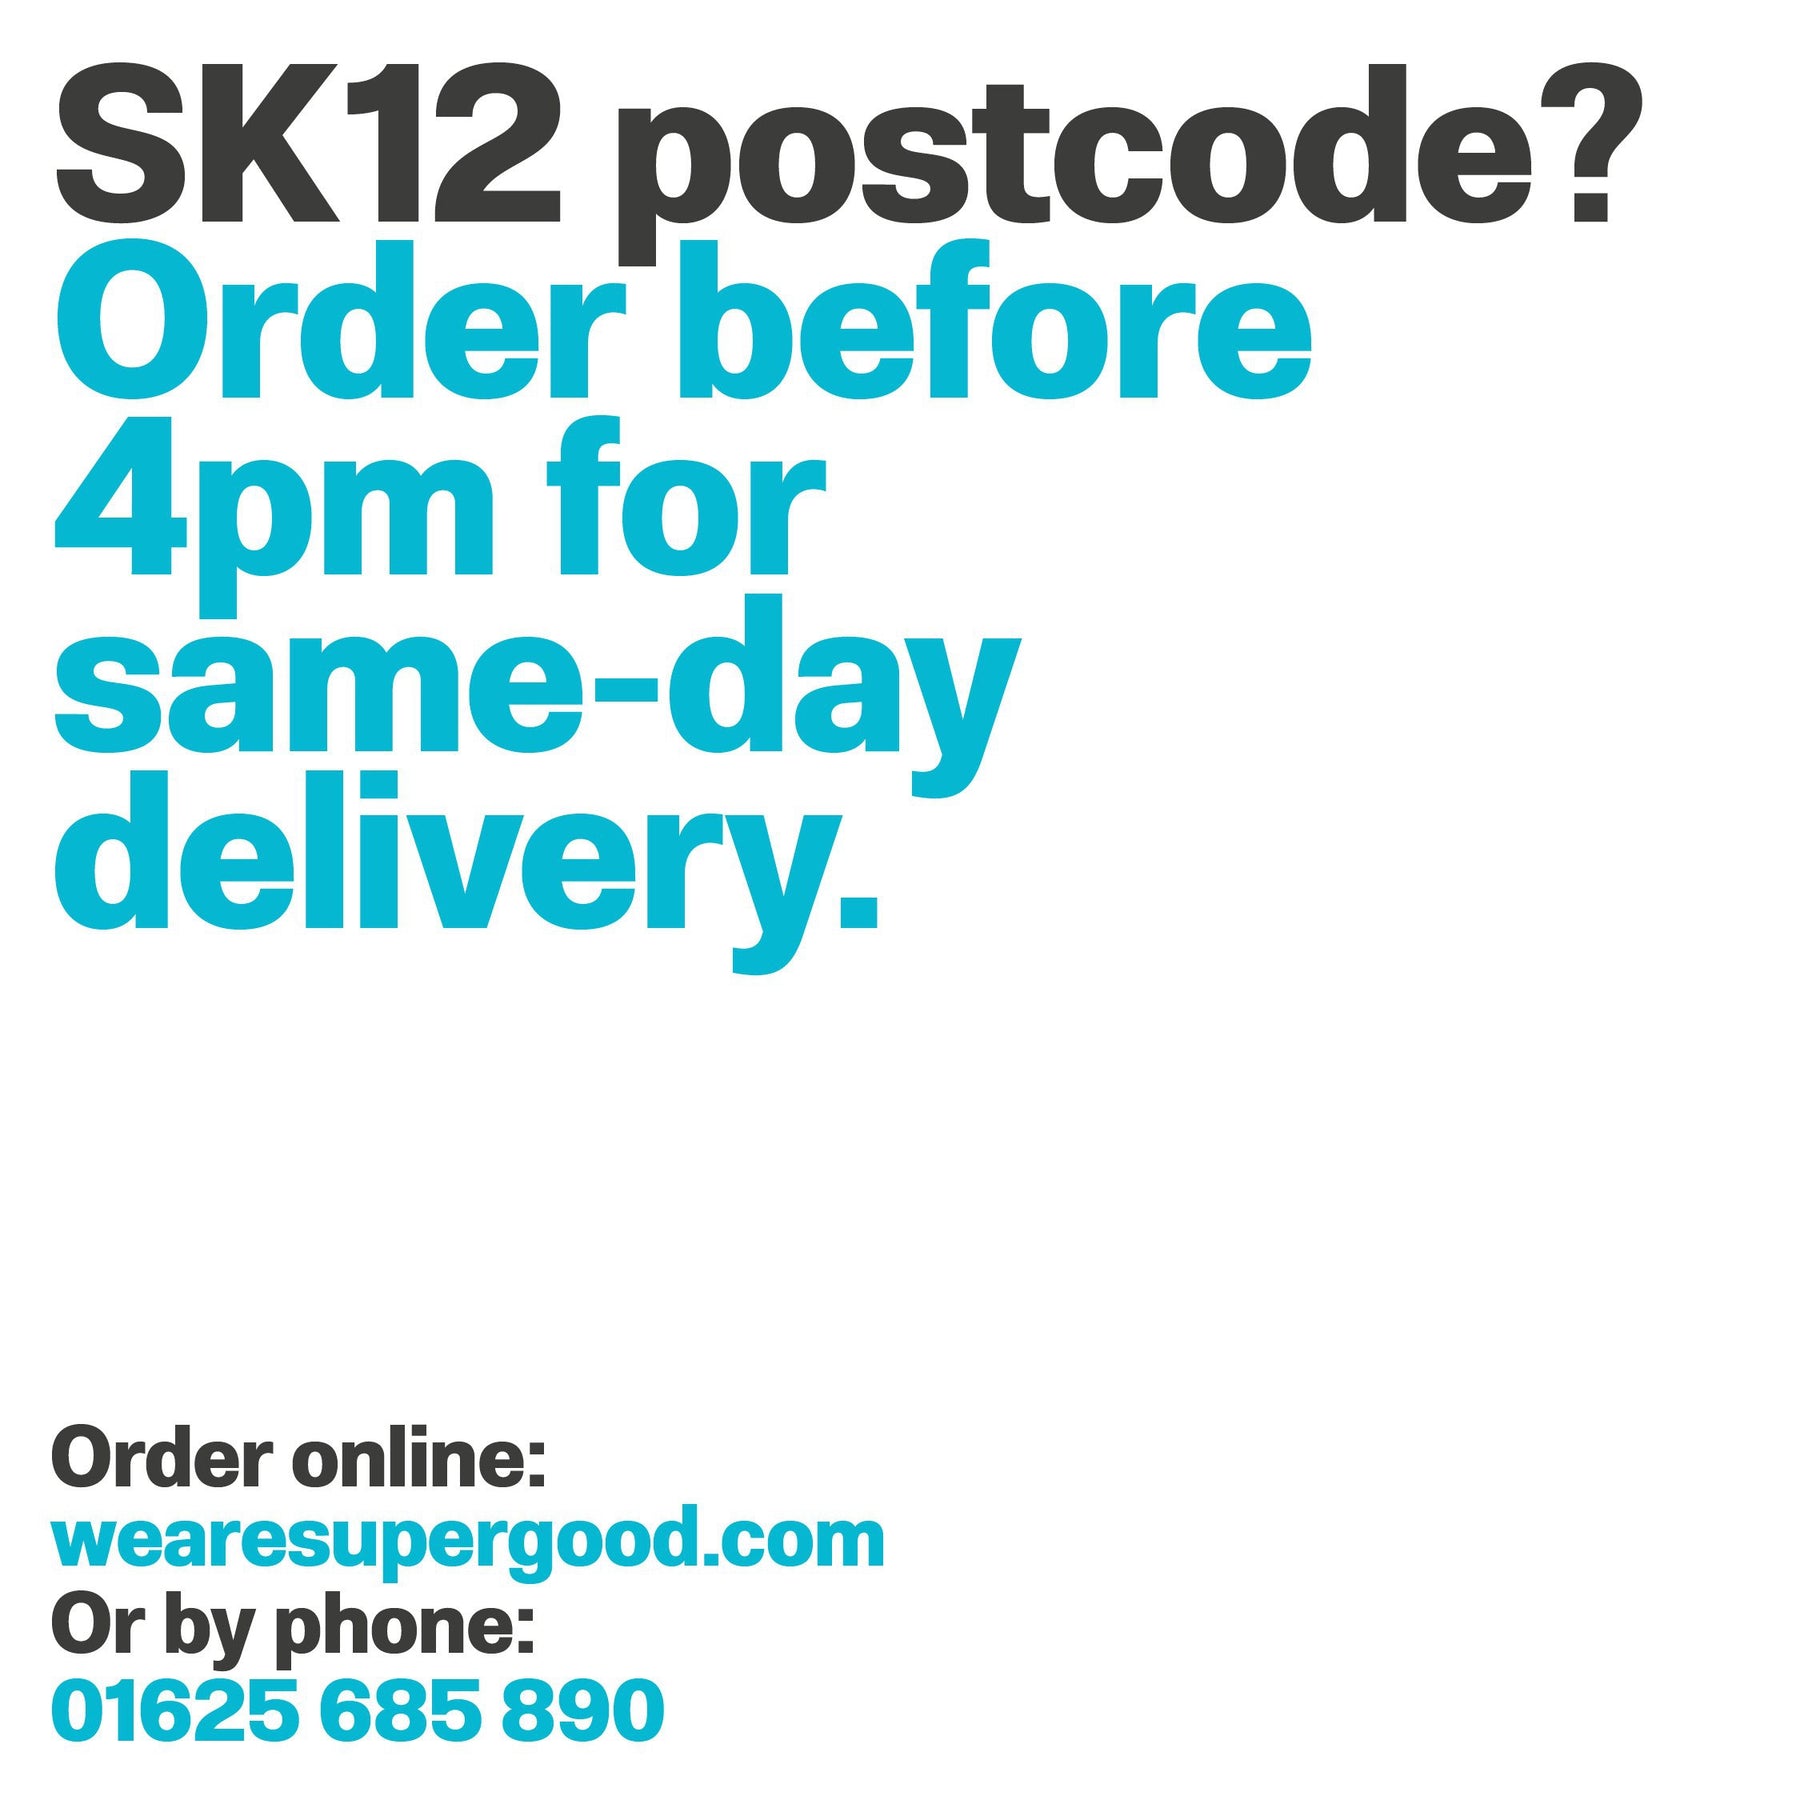 News-Free Same-Day Home Delivery in SK? | We Are Supergood.